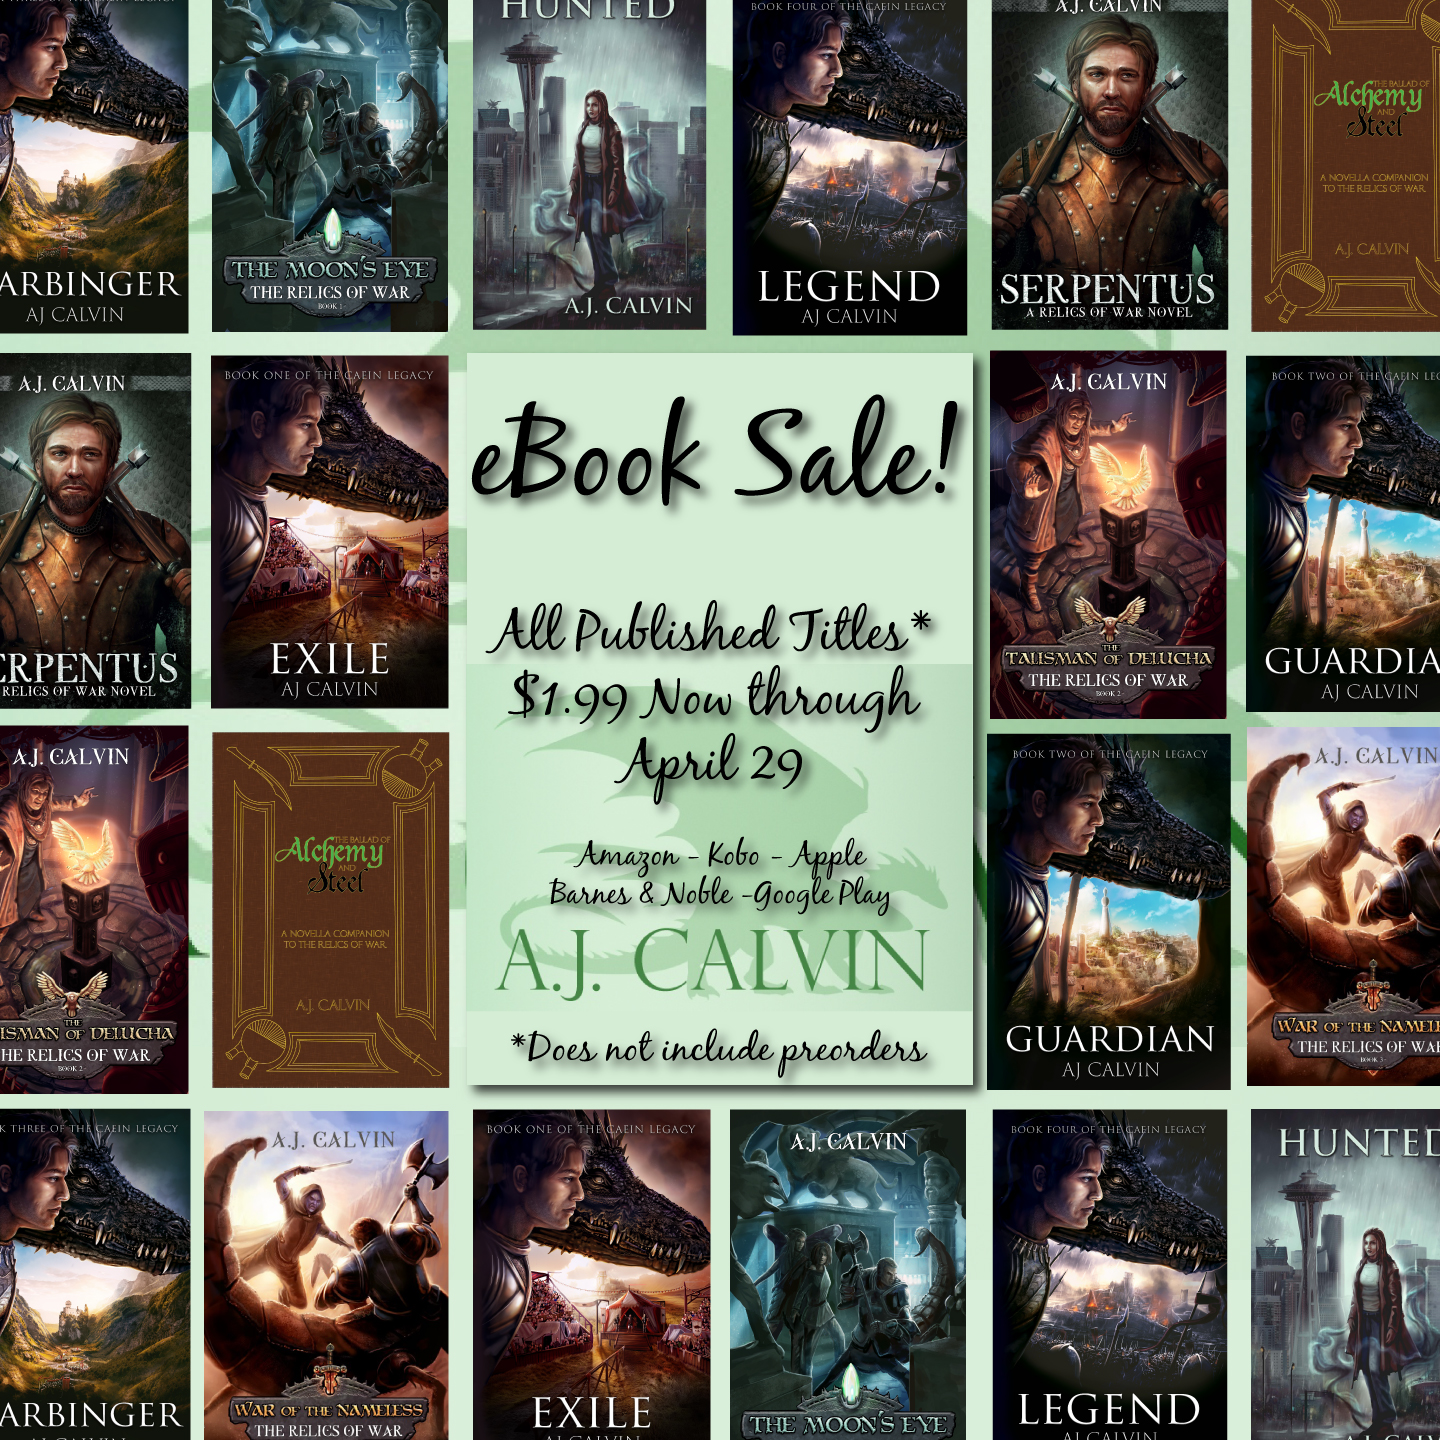 All my eBooks are on sale!